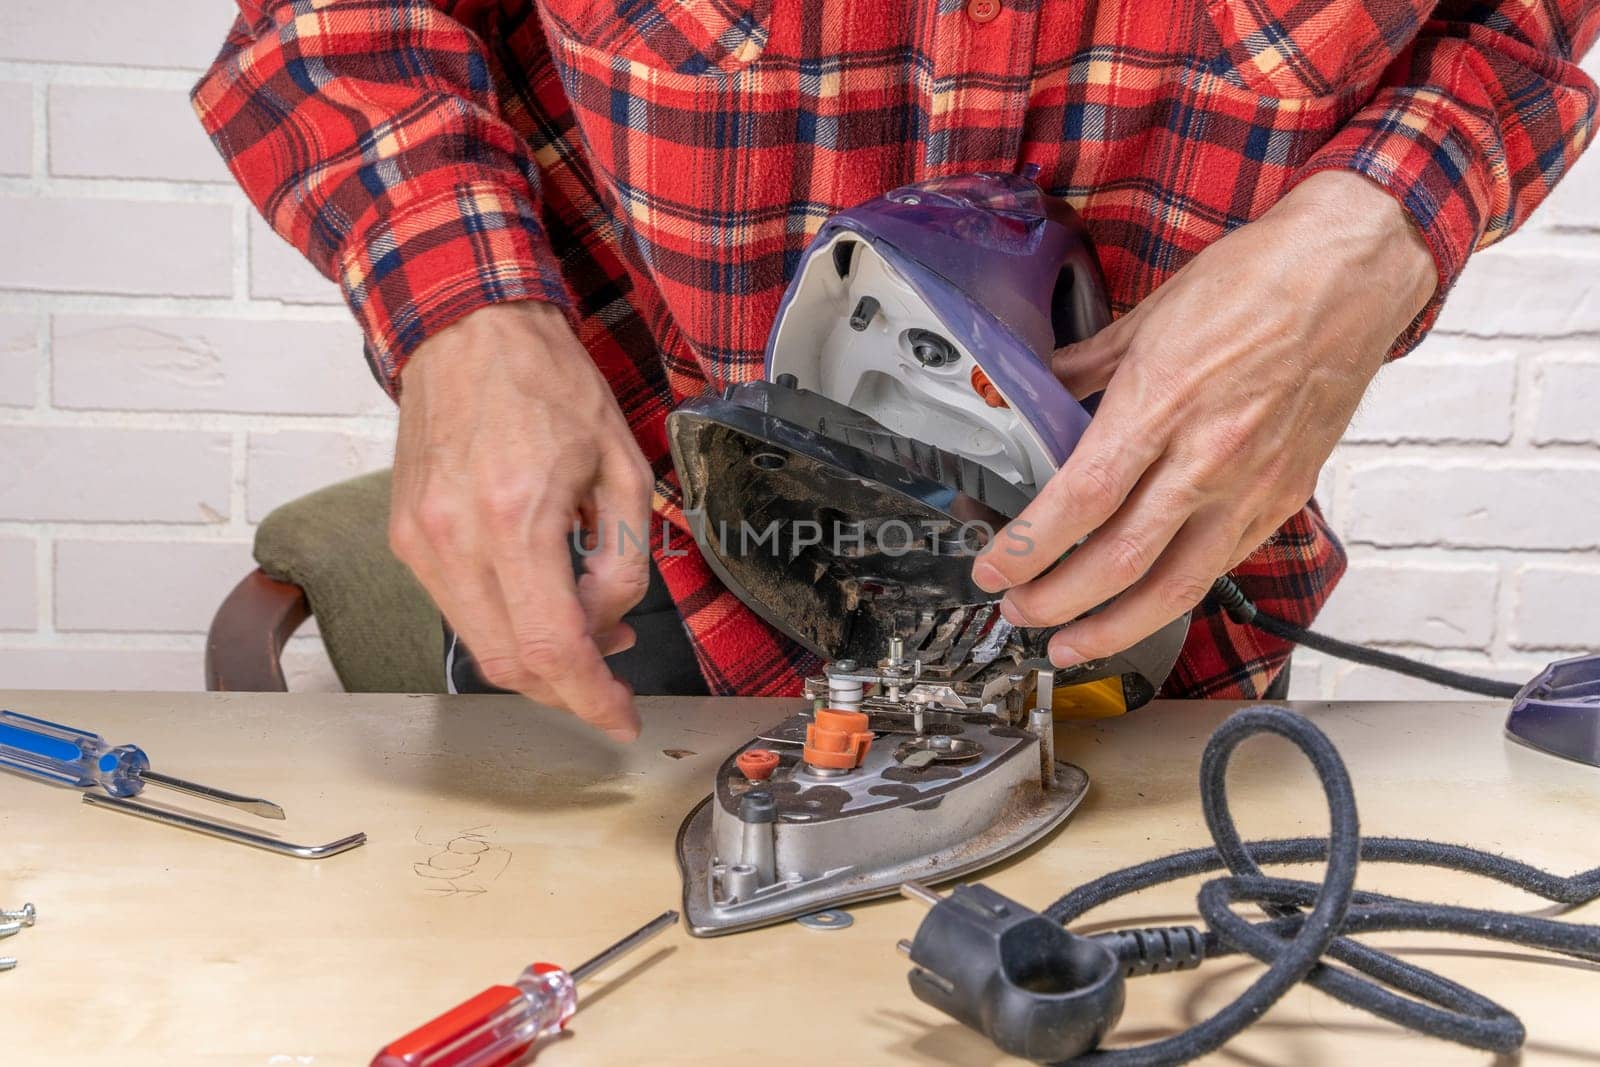 husband or the head of the family is trying to repair a broken steam iron at home on the table using simple tools. Disassembled electric iron. repairman checking and fixing broken iron